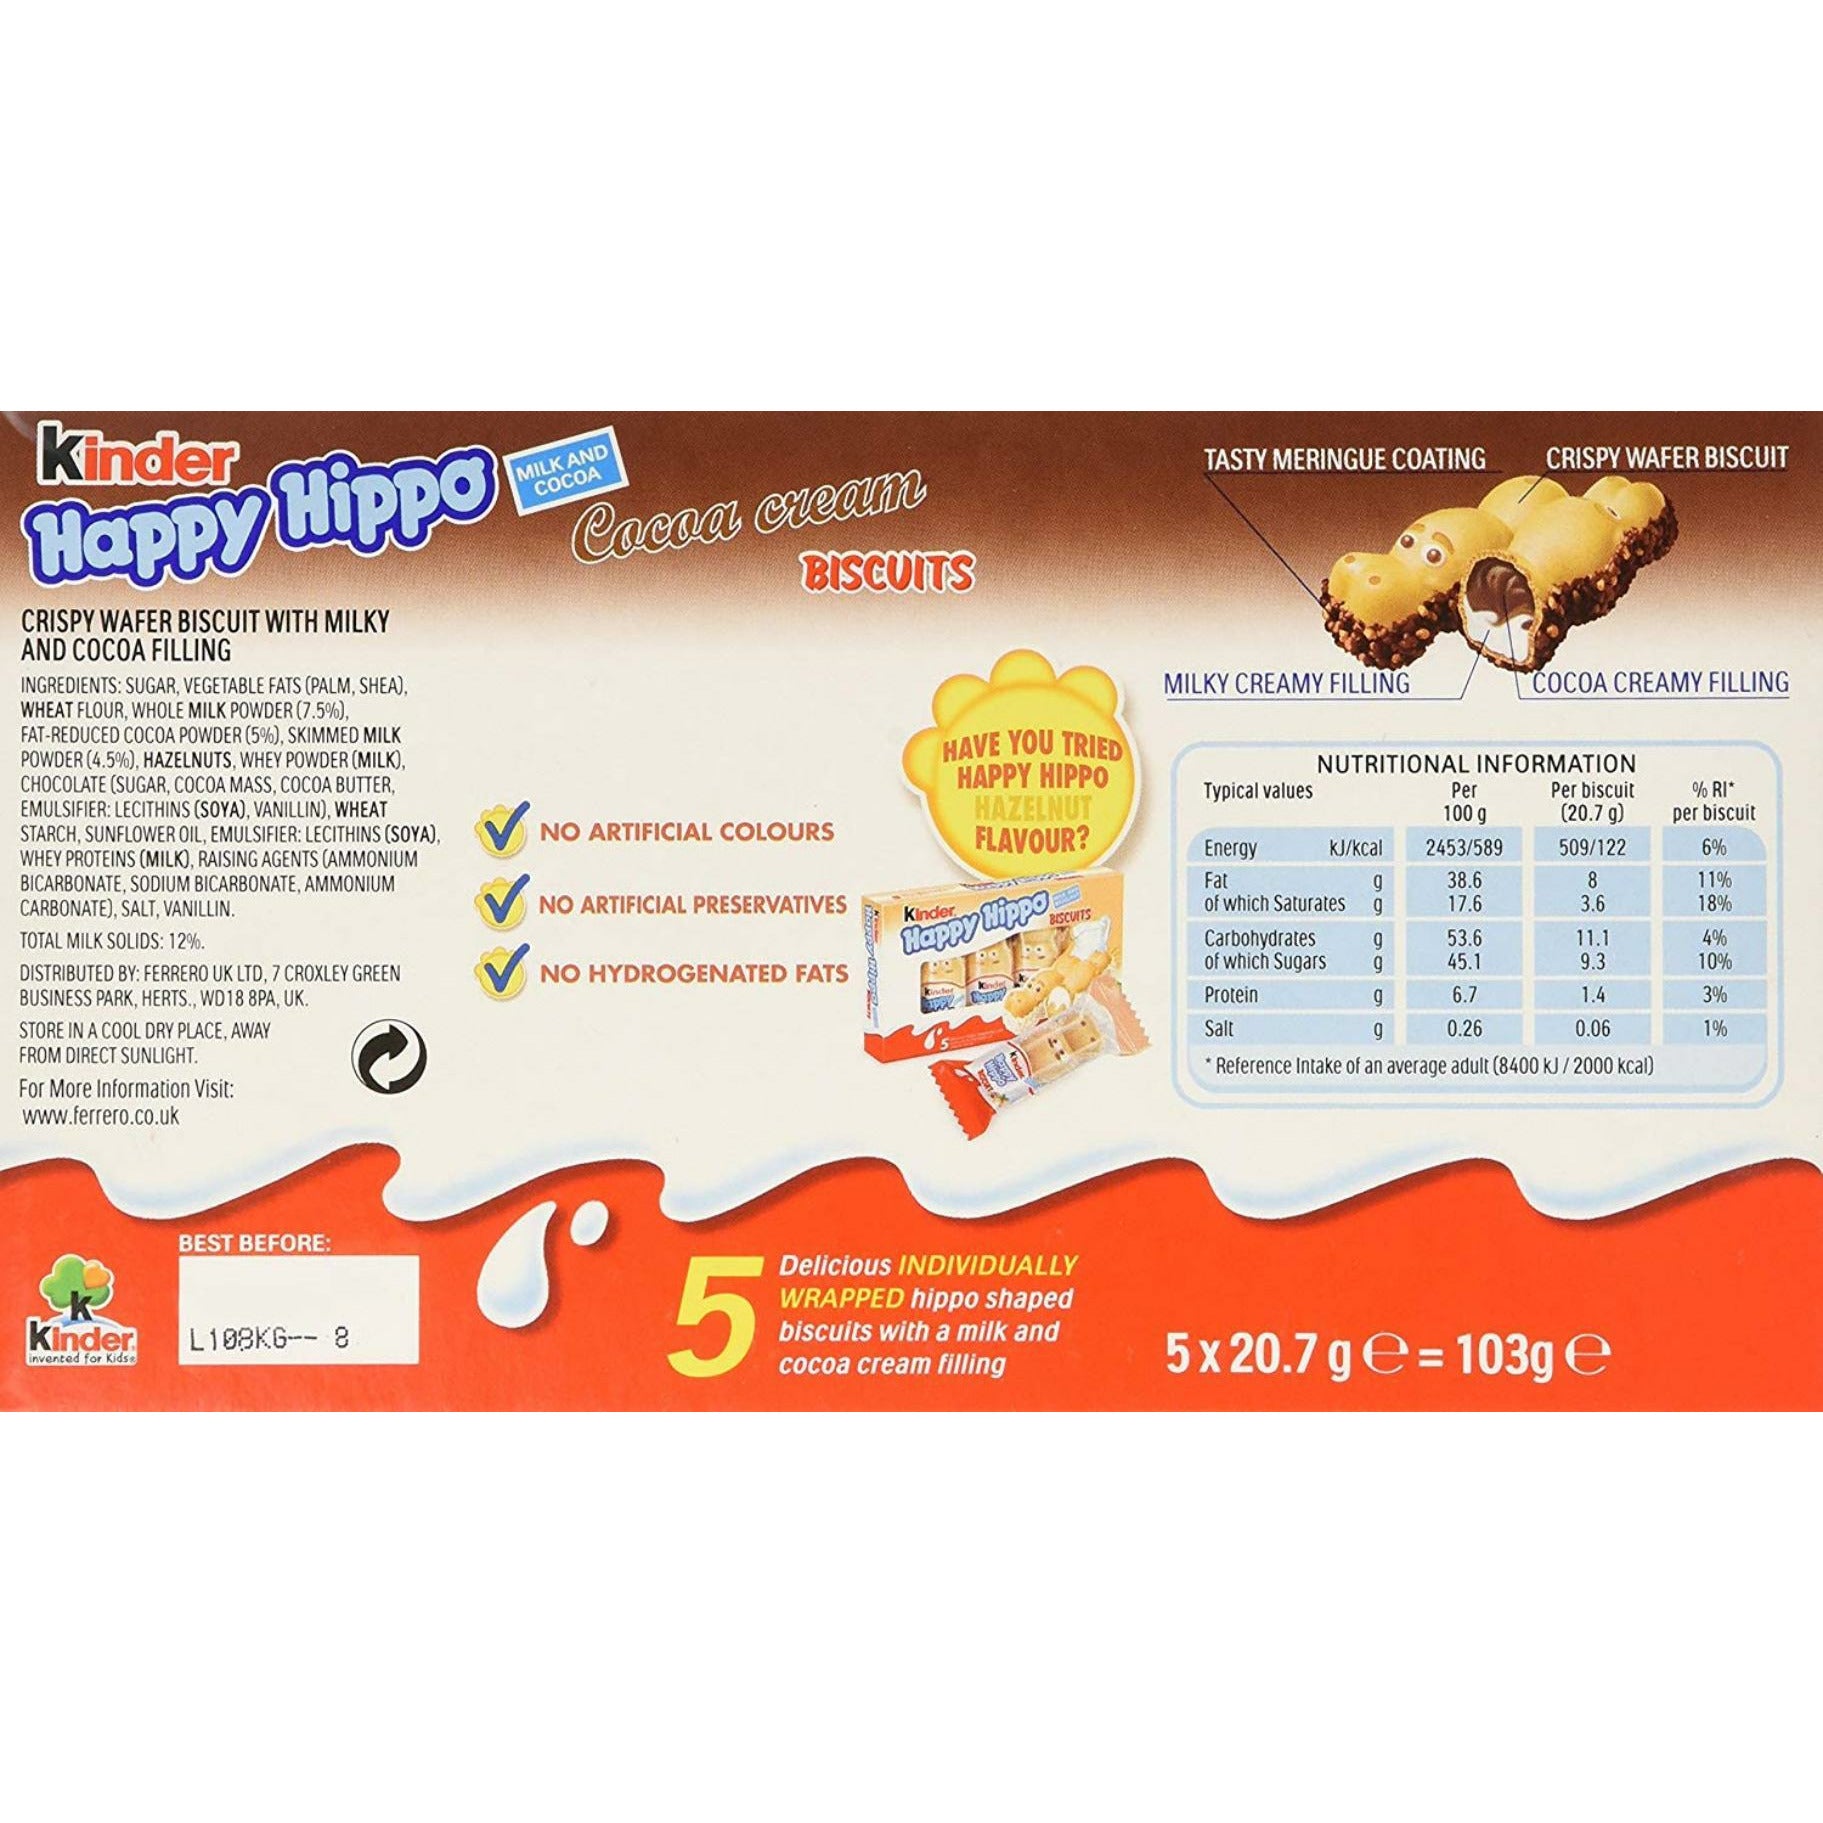 KINDER HAPPY HIPPO COCOA 5 PACK - My American Shop